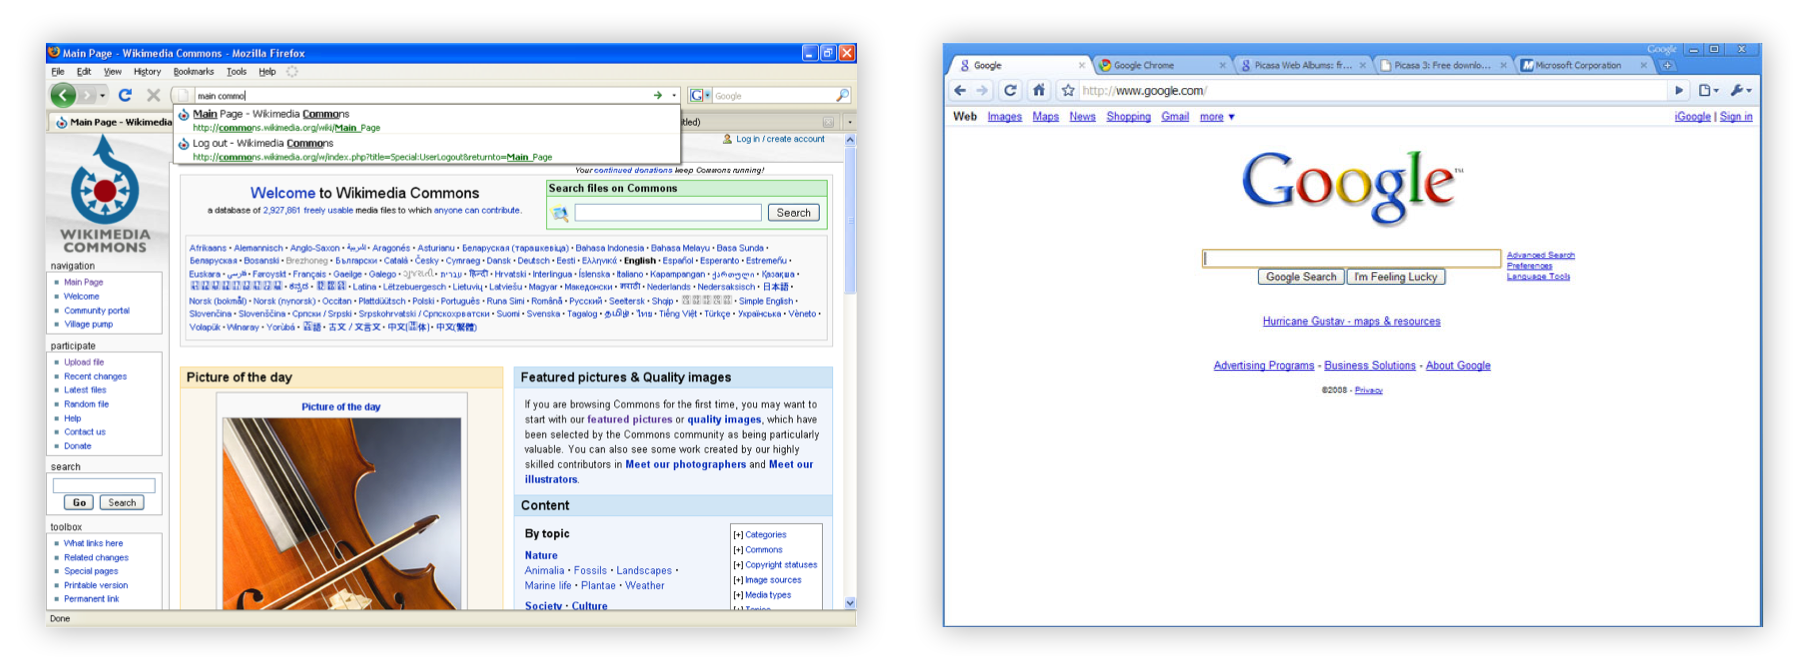 Firefox and Chrome in 2009